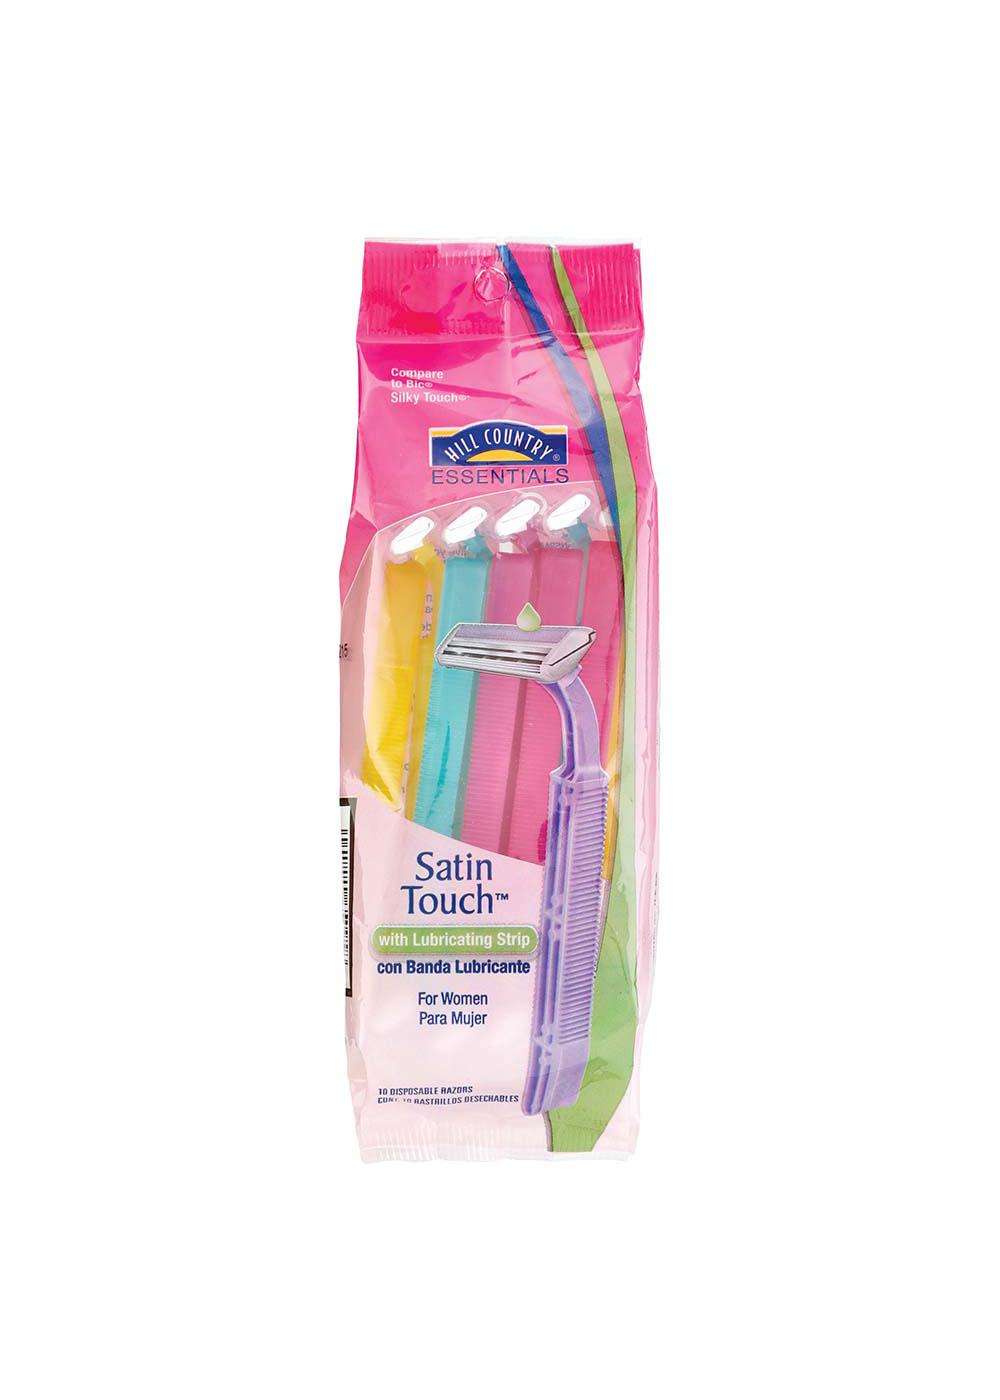 Hill Country Essentials Satin Touch with Lubricating Strip Disposable Razors For Women; image 1 of 4